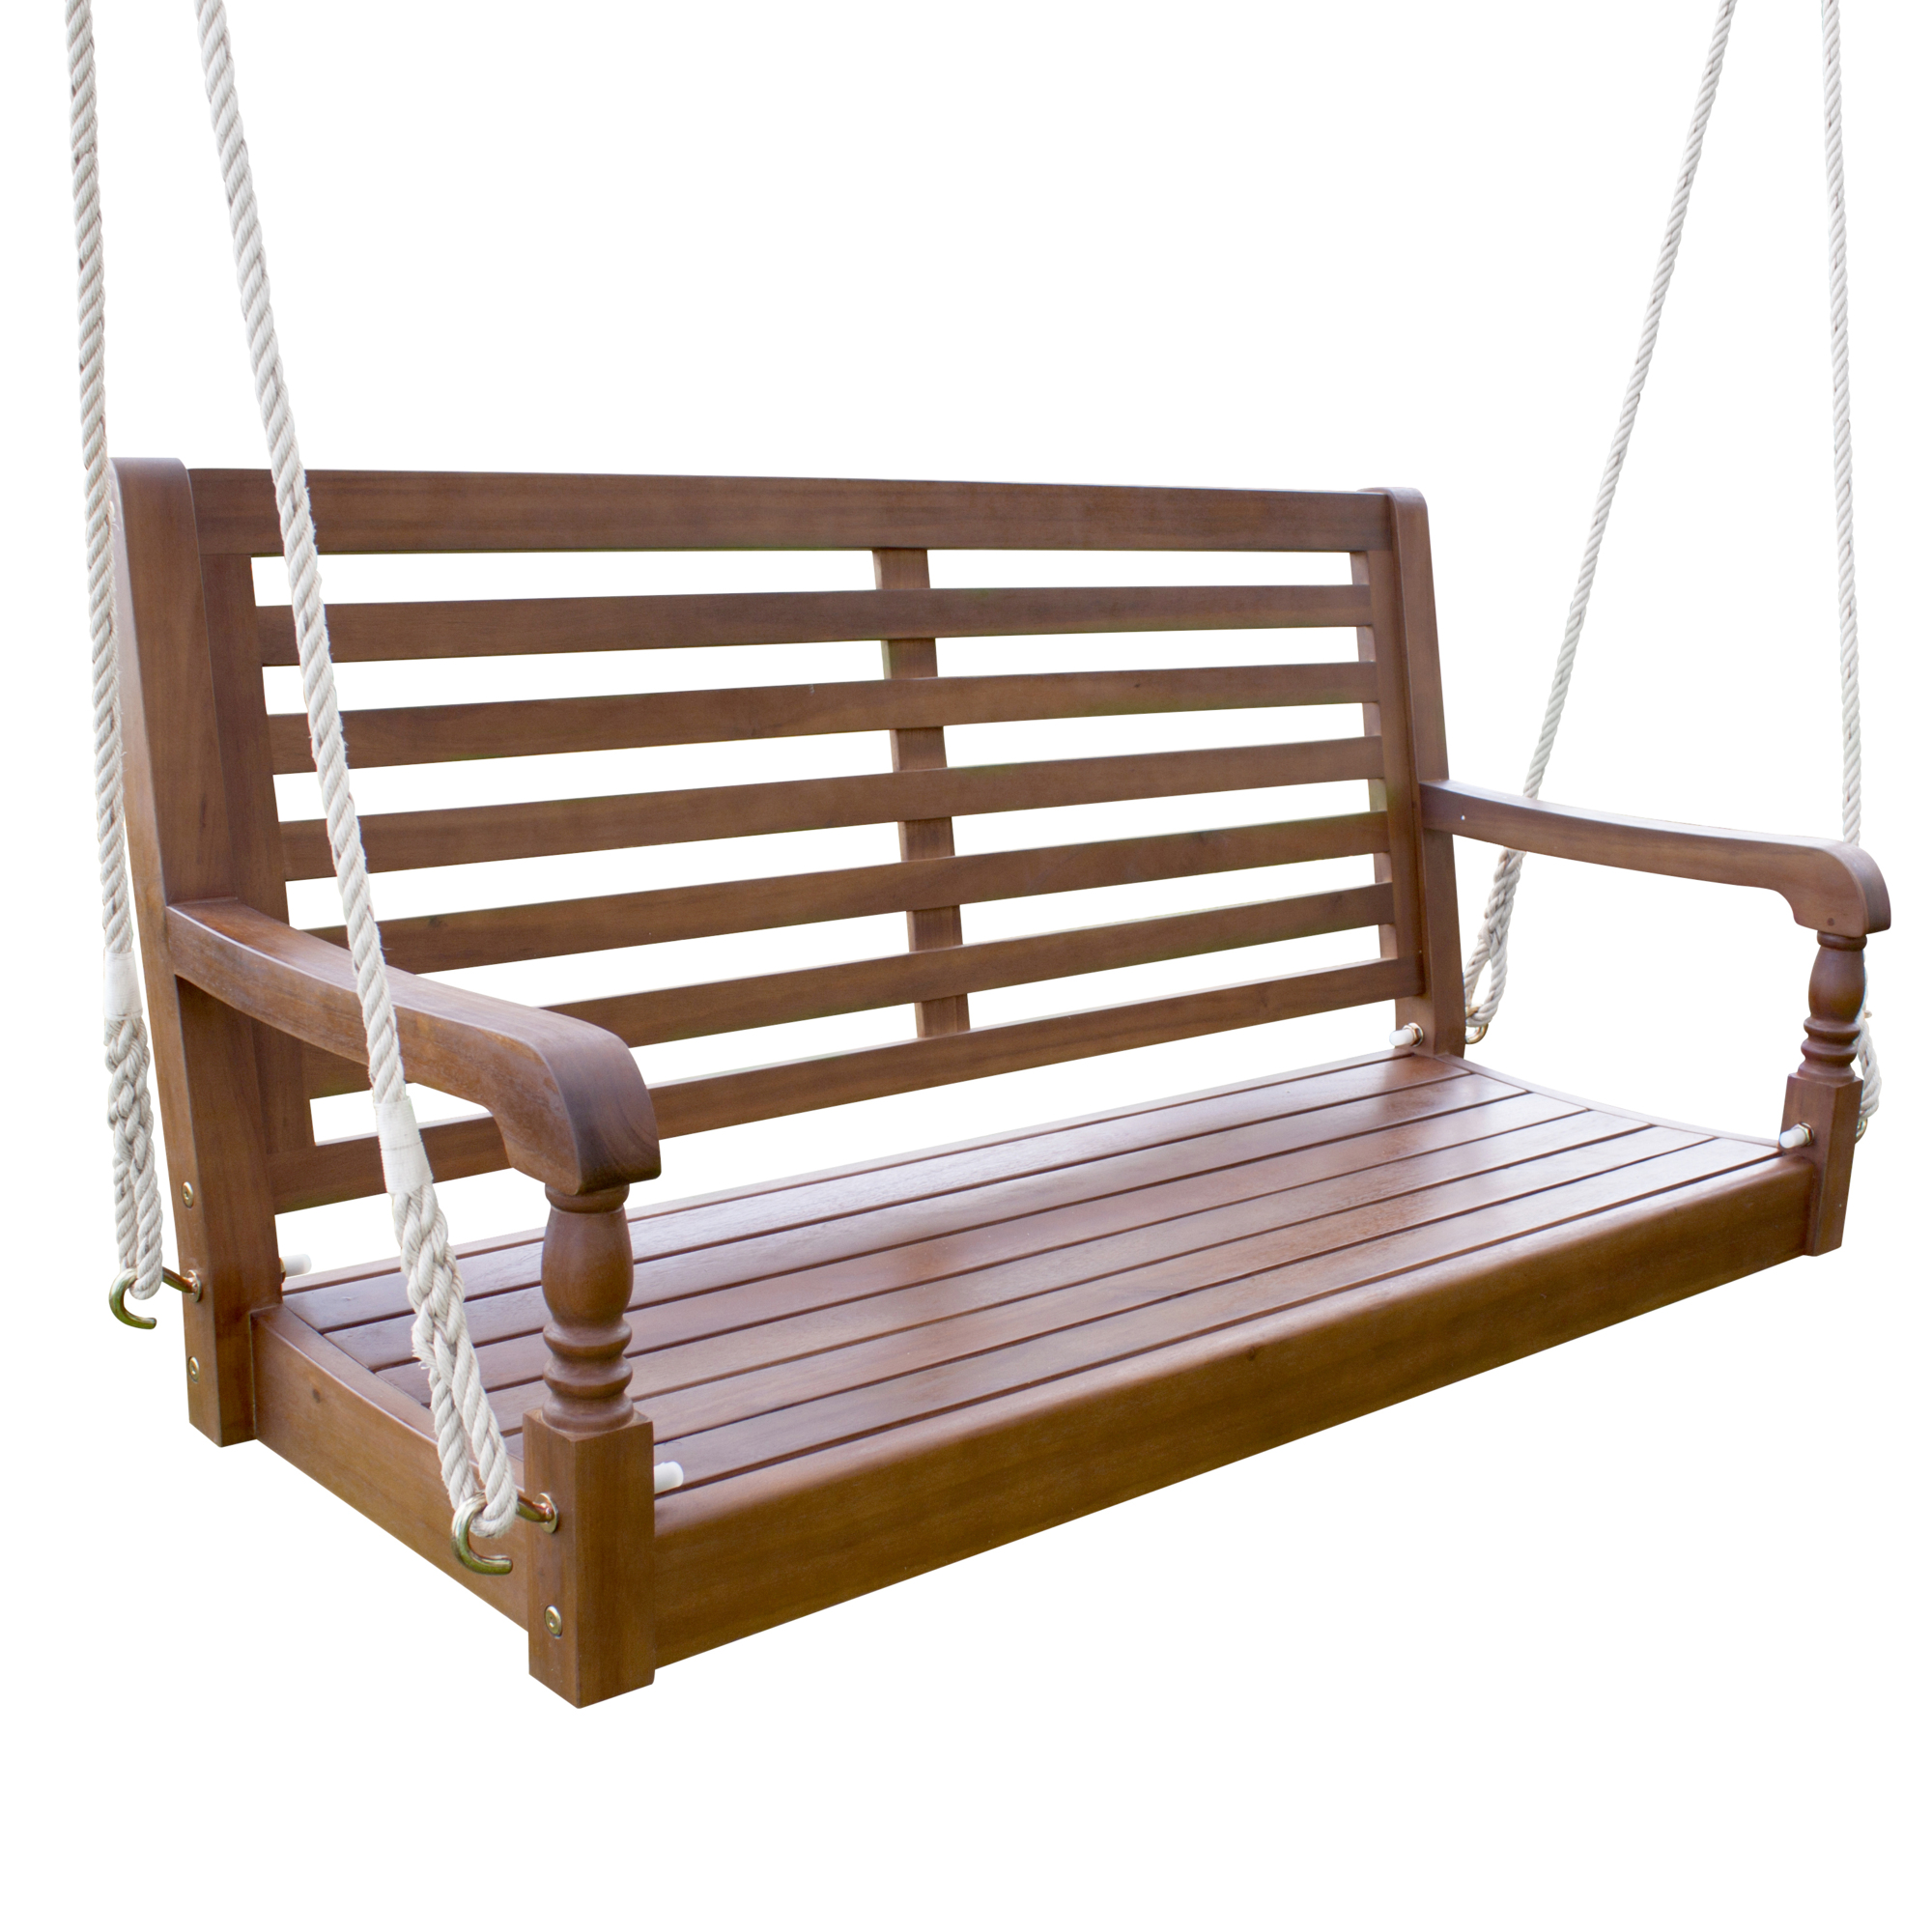 Merry Products, Nantucket Porch Swing, Natural, Primary Color Brown, Material Wood, Width 46.46 in, Model SWG0120210010